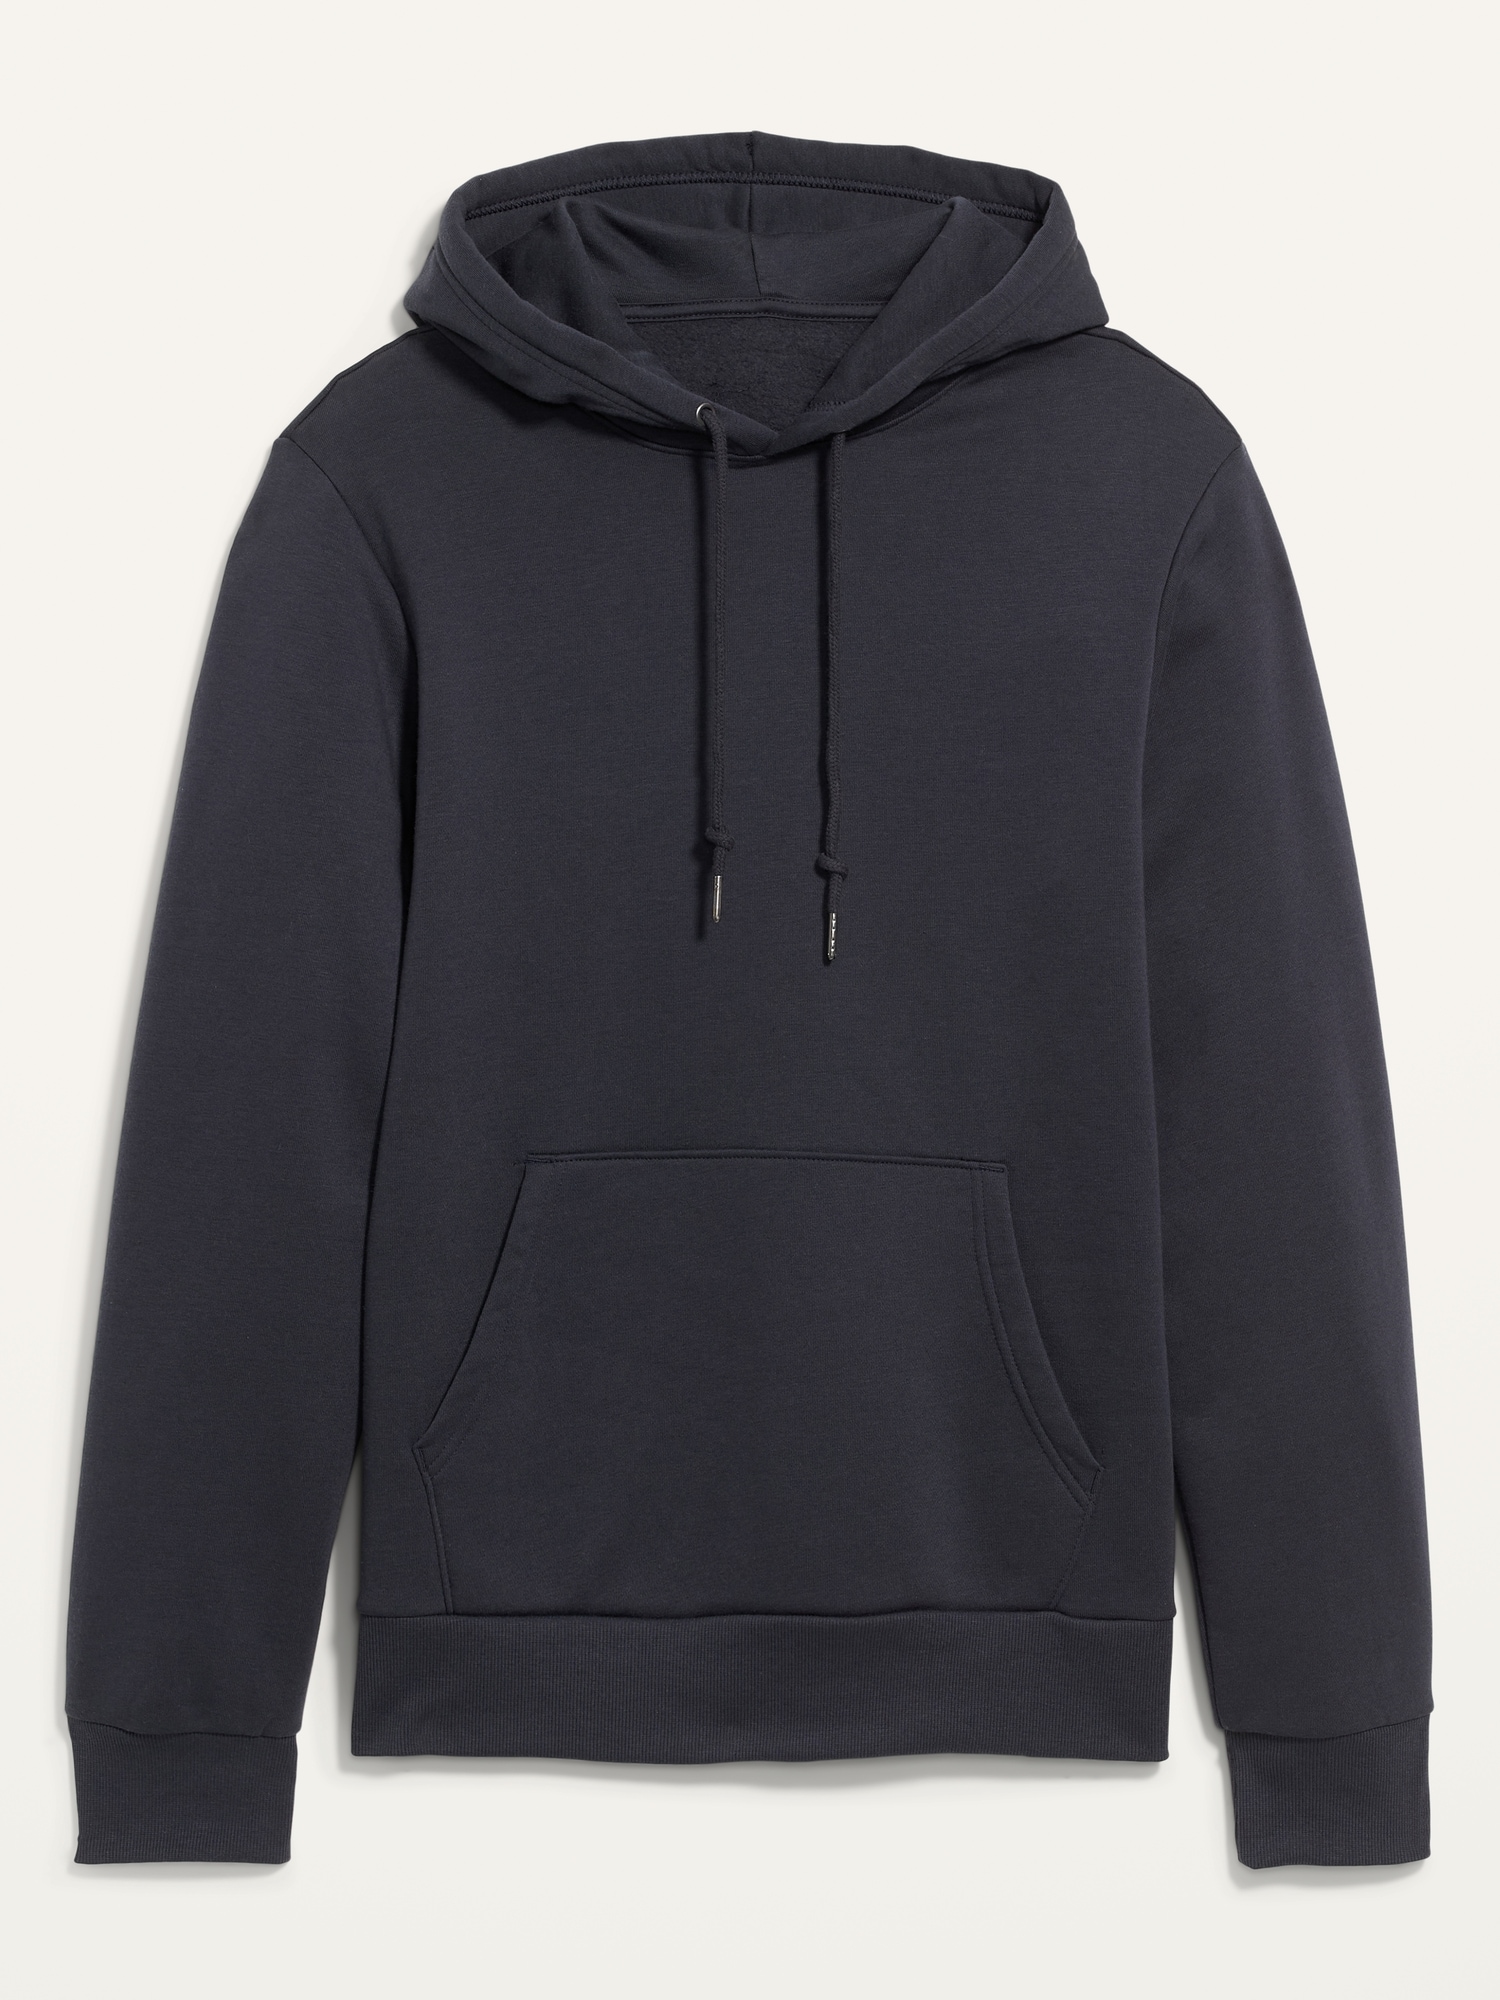 Adult Regular Fit Plain Colour Hoody with Pockets Men's Pull-Over Hooded Sweatshirt Hoodie 